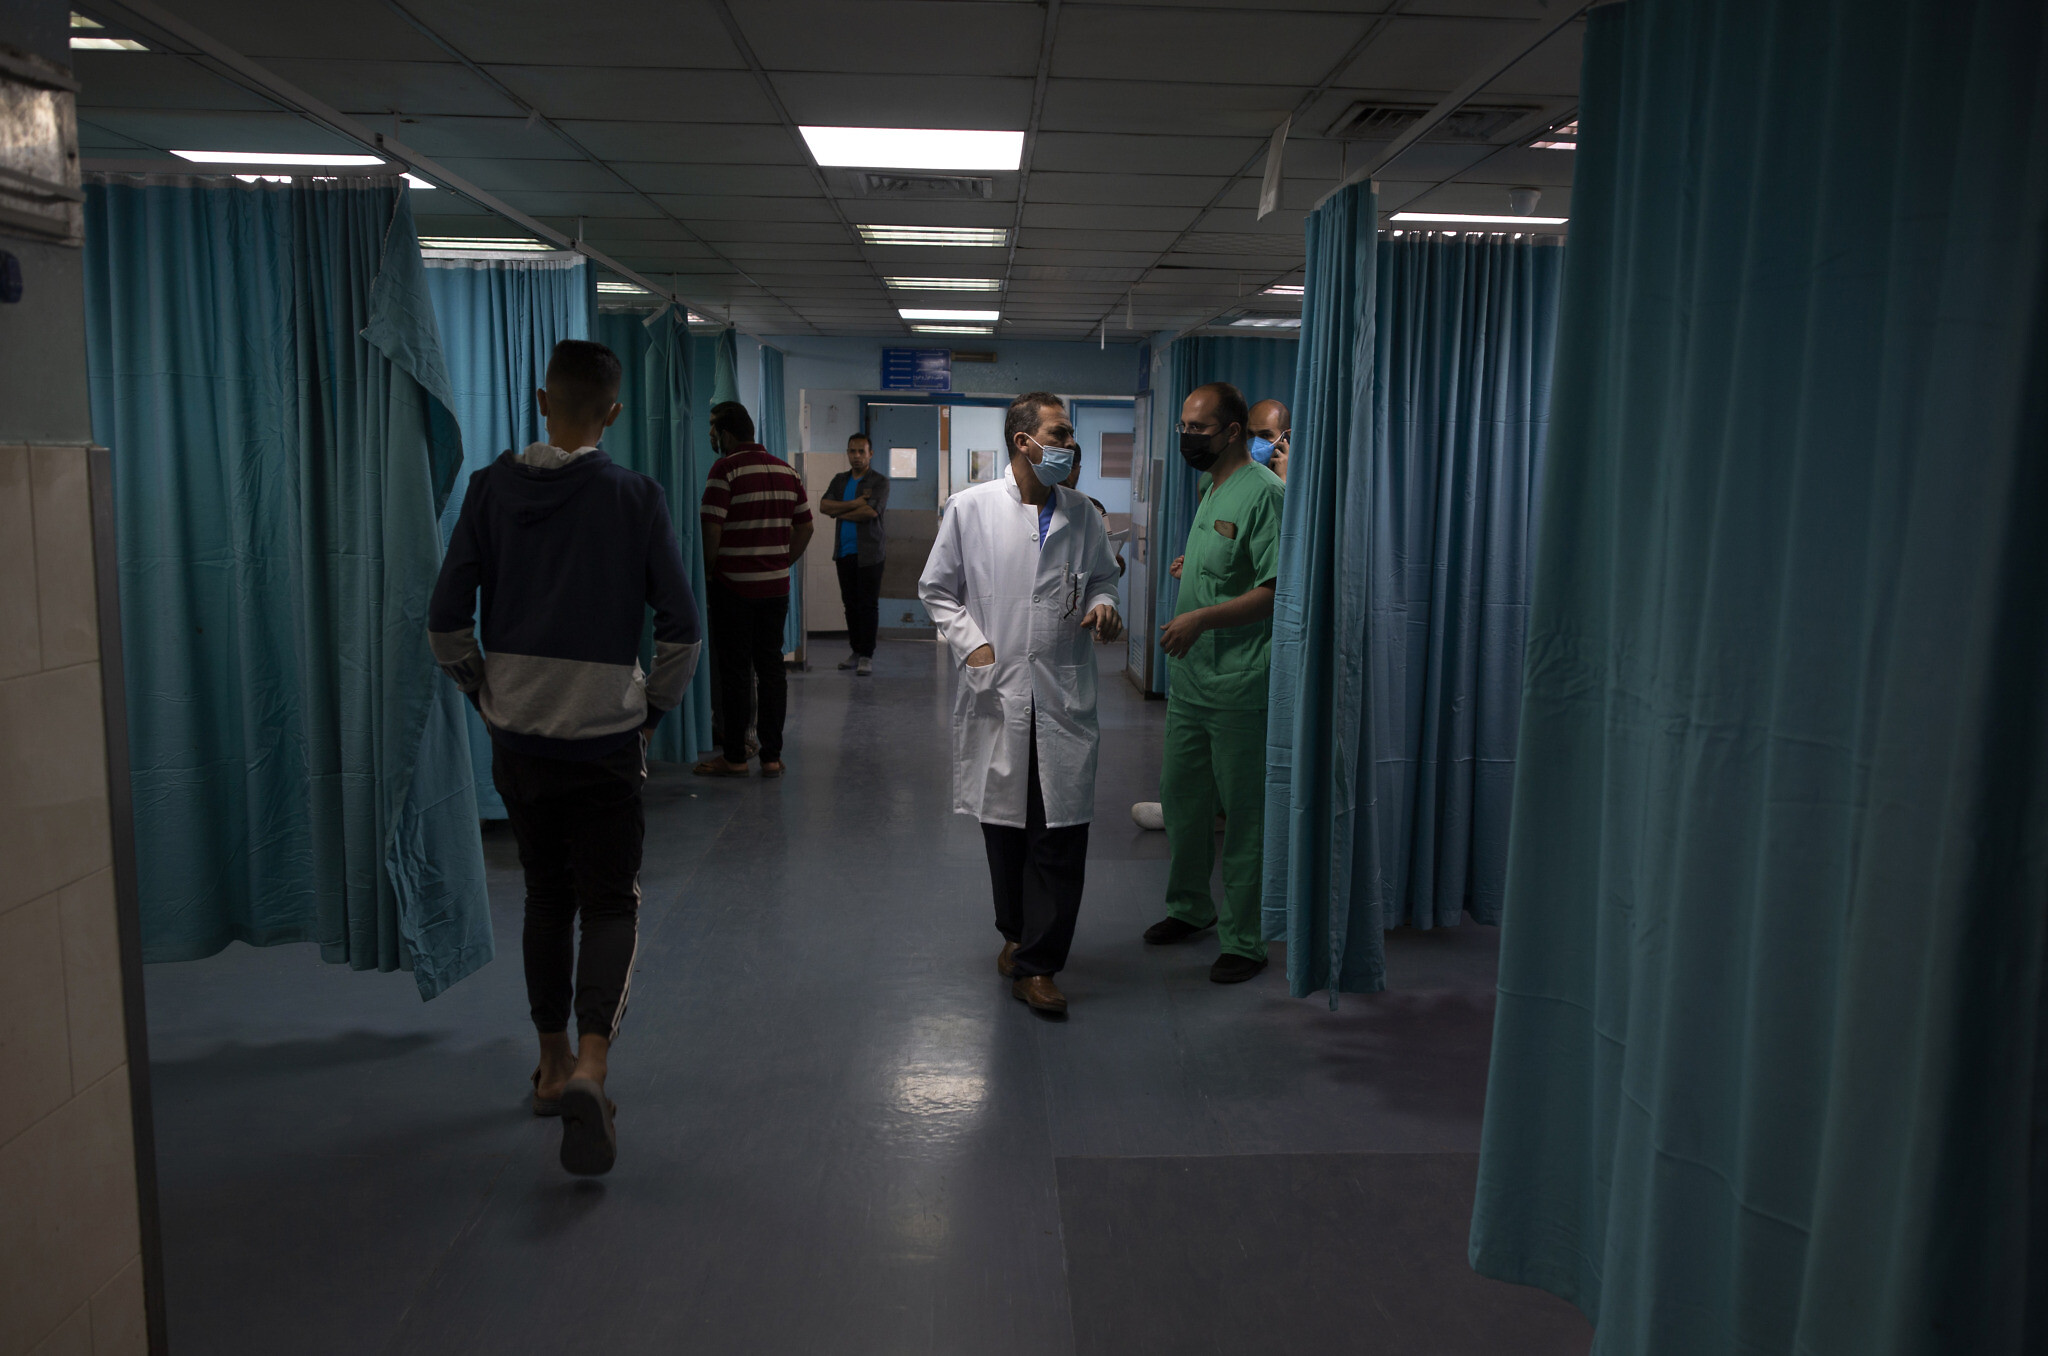 Gaza's hospitals, already struggling amid COVID, now face wounded from